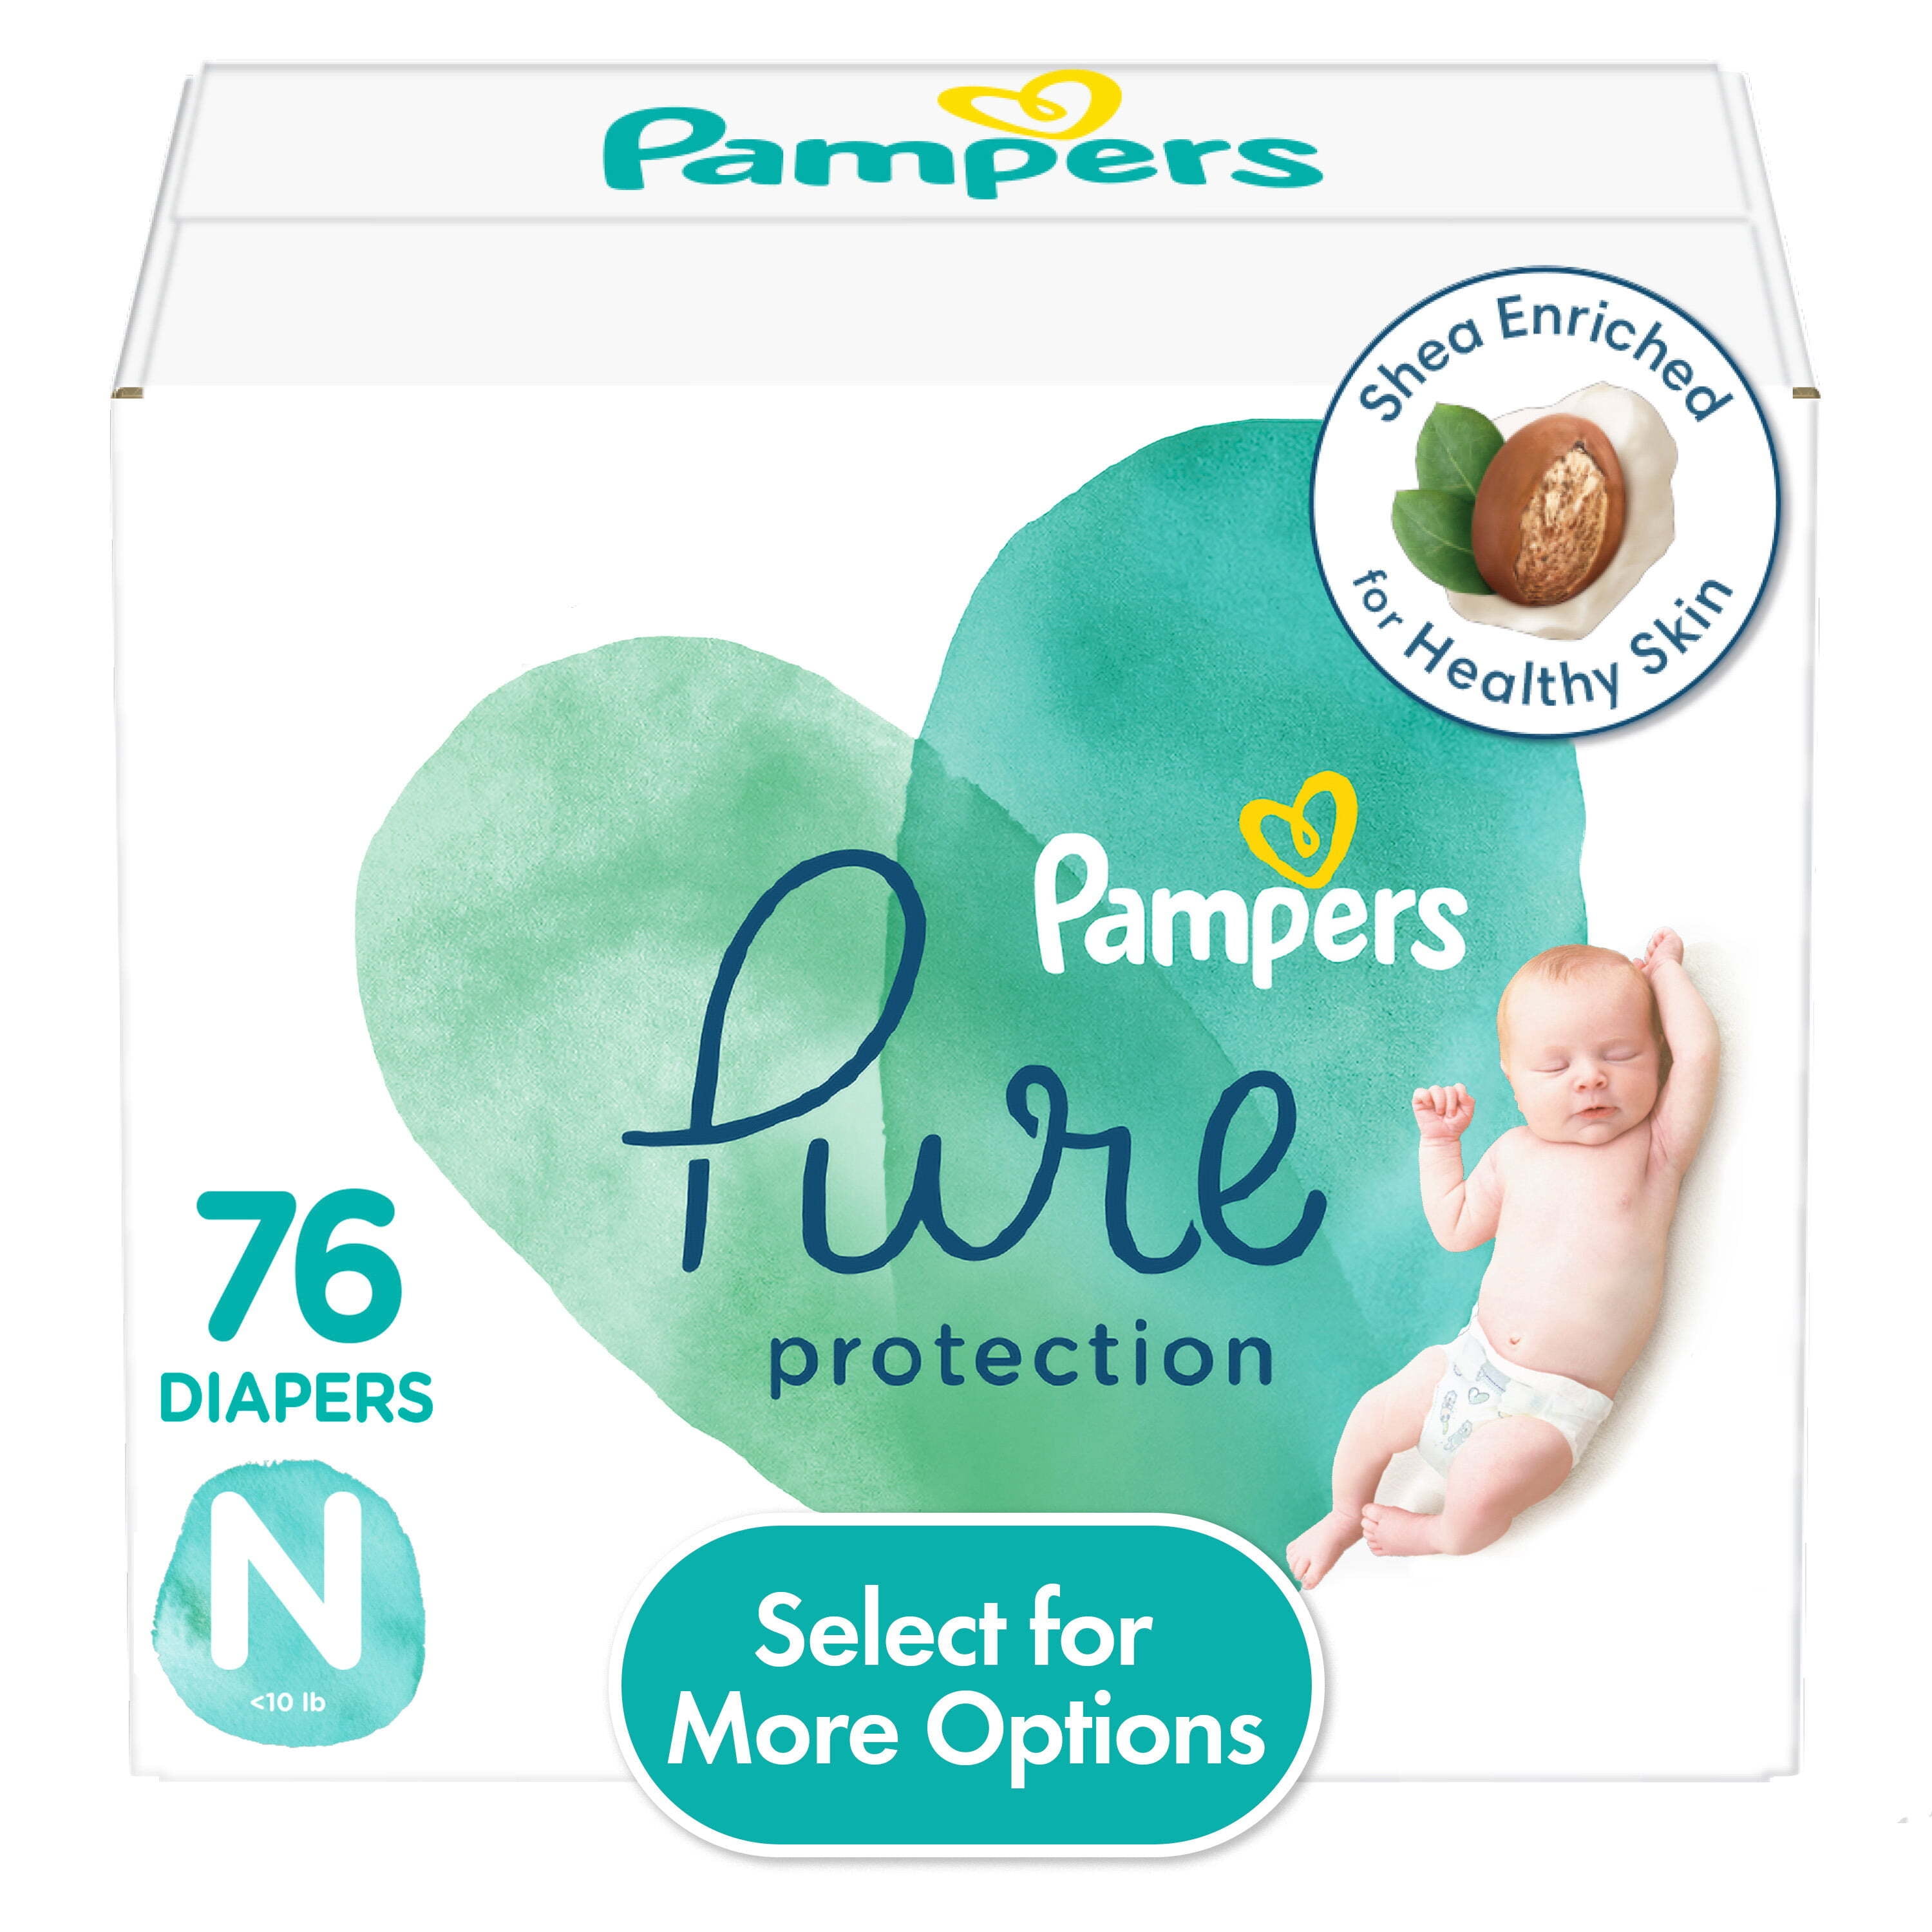  Pampers Pure Protection Diapers - Size 4, One Month Supply (150  Count), Hypoallergenic Premium Disposable Baby Diapers : Baby